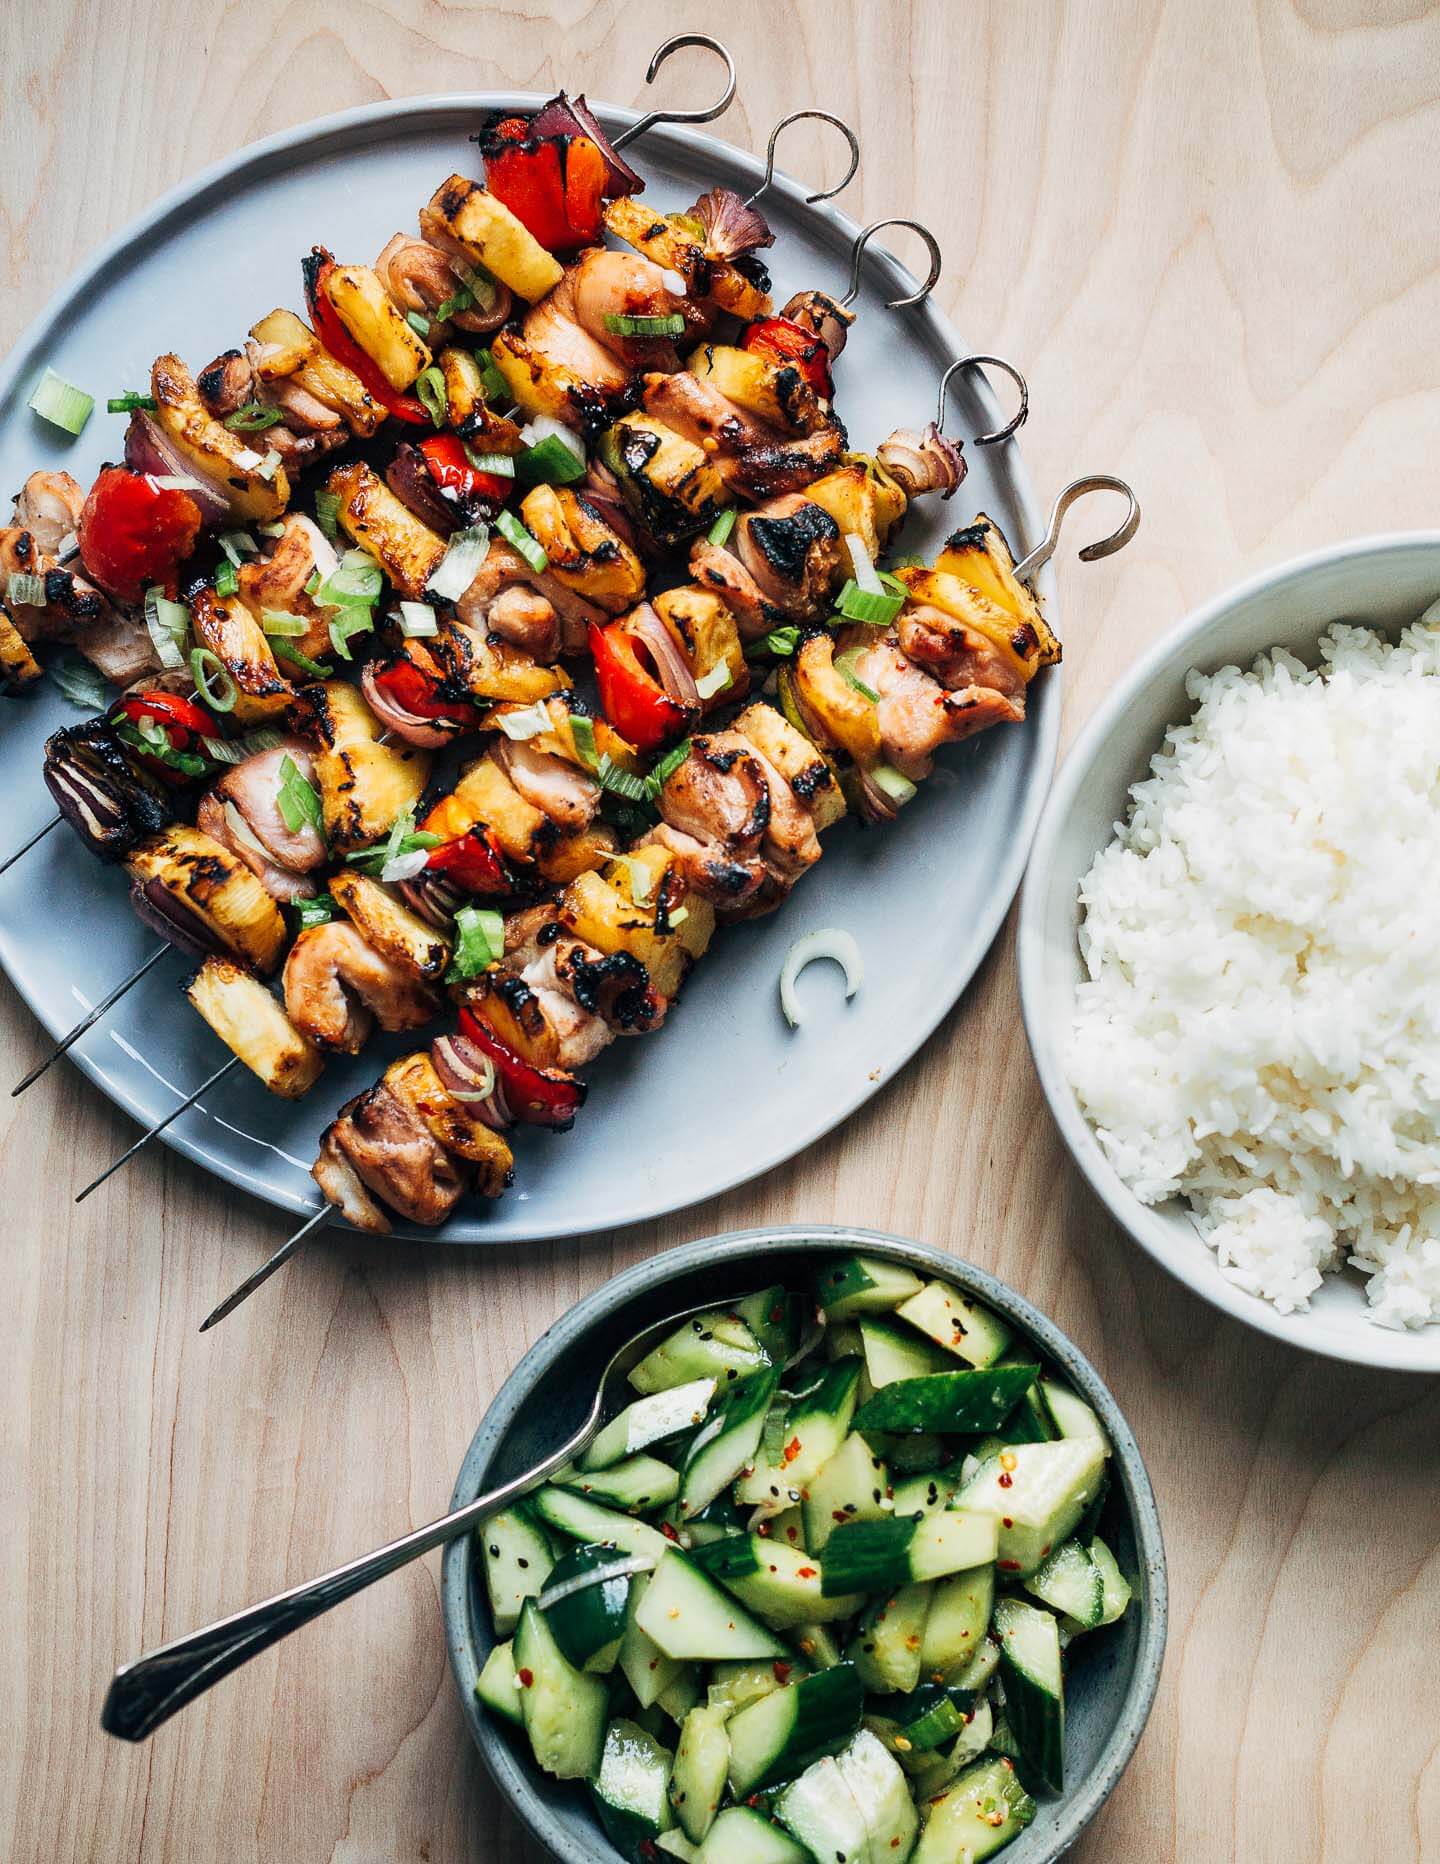 Sweet, savory, and perfectly charred, these easy grilled pineapple chicken kebabs are steeped in a brown sugar and lime marinade and grilled with bell peppers and red onions.